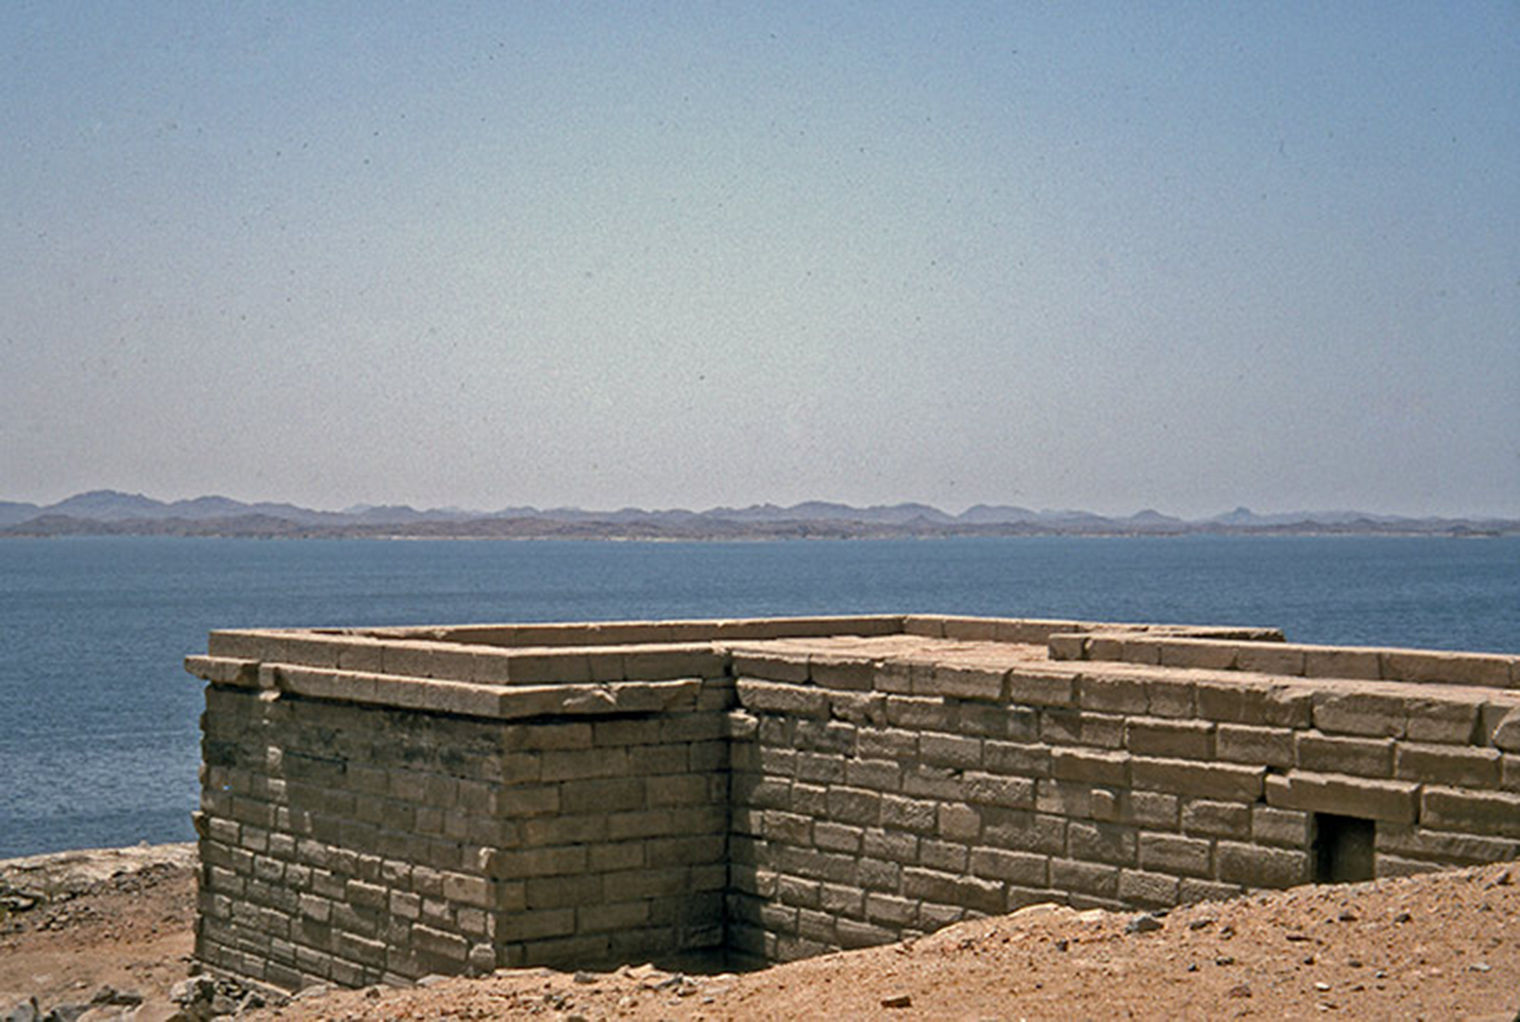 A color photograph of the terrace of the temple at Kalabsha, overlooking the Nile river.